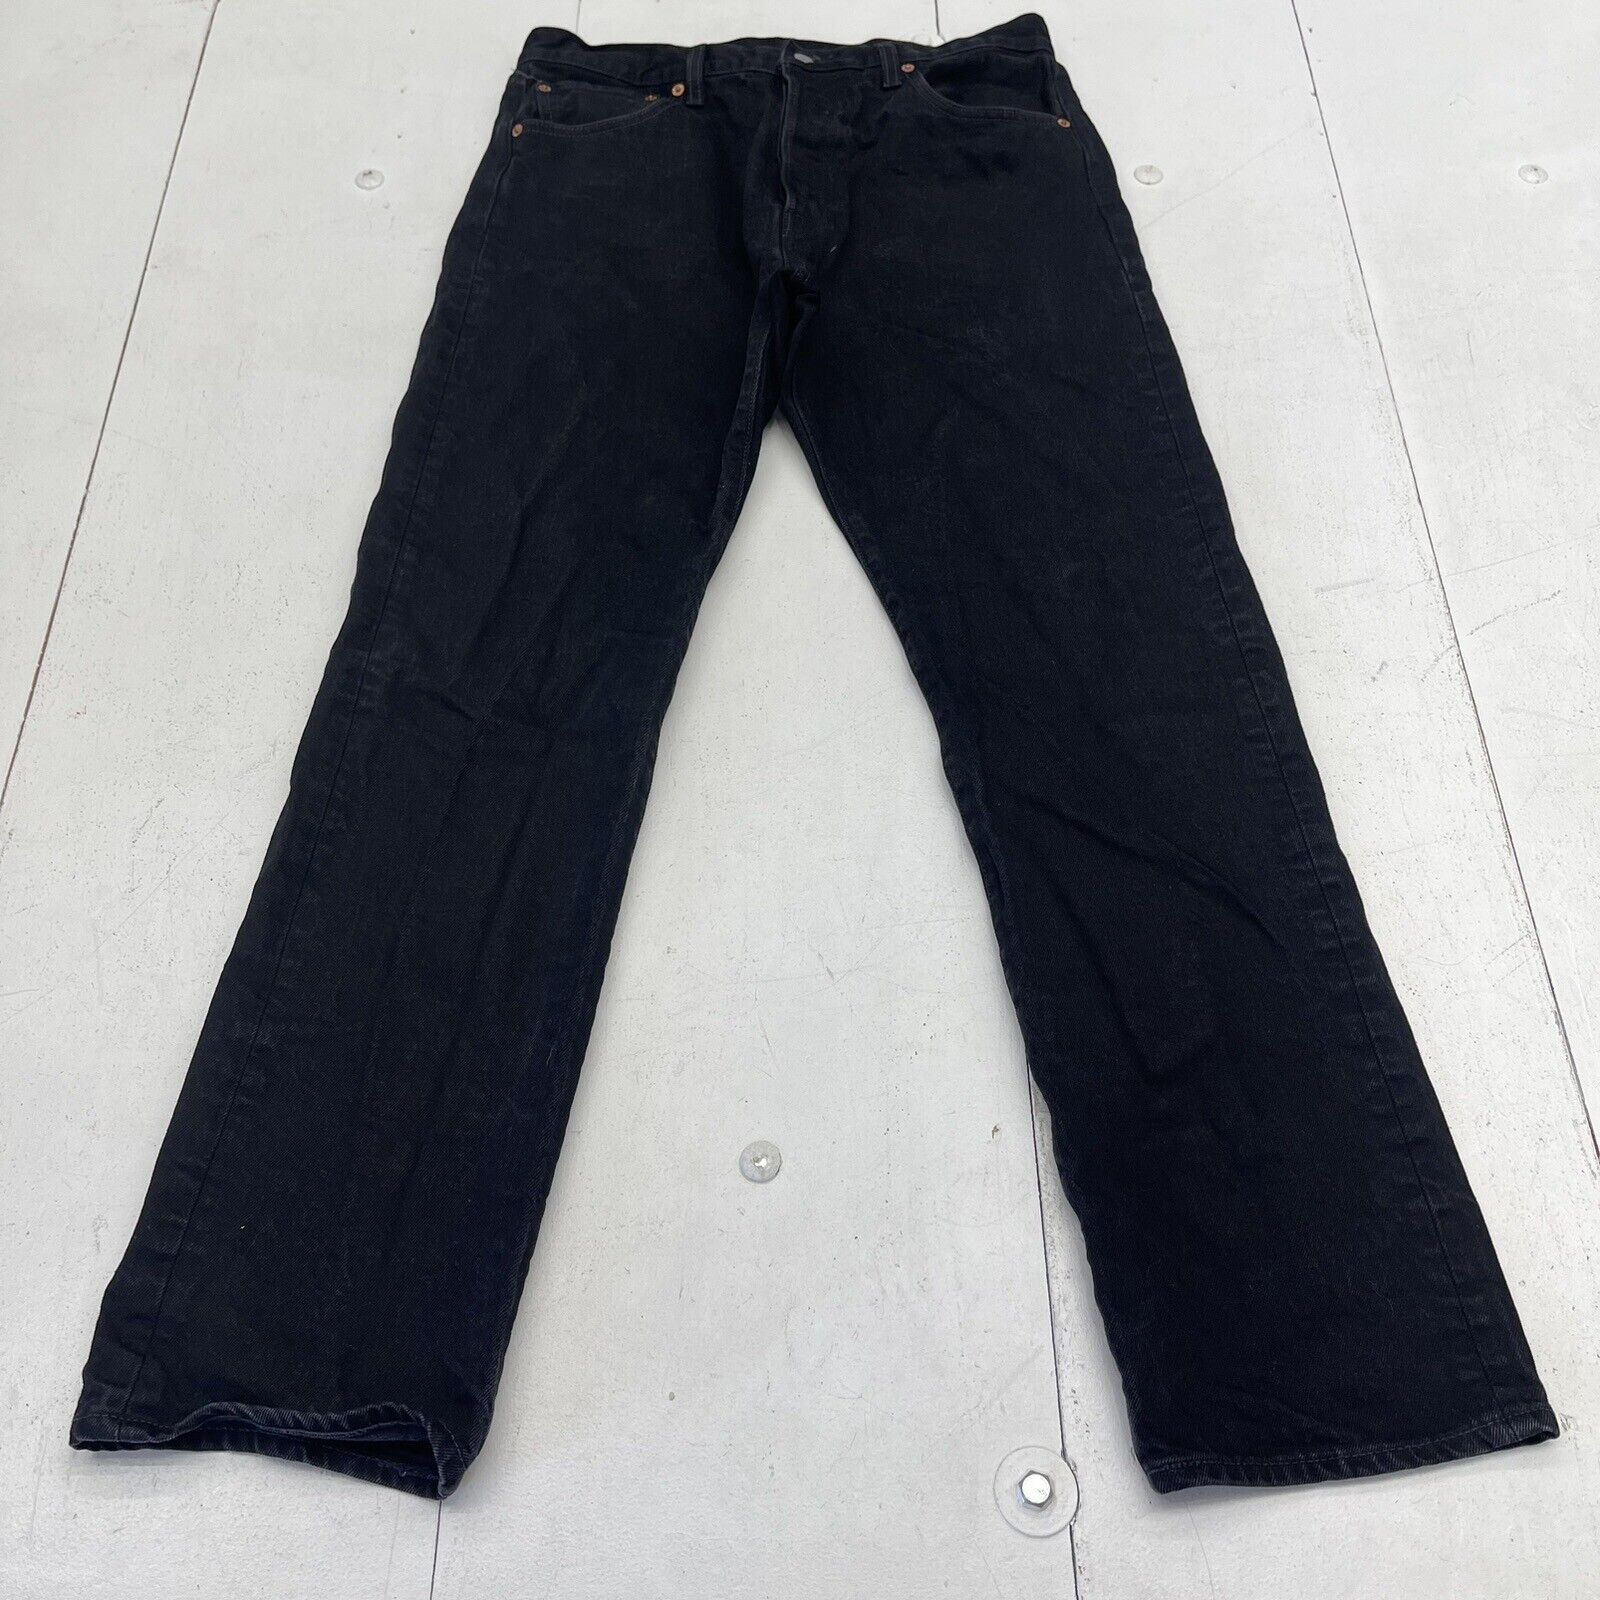 Levi’s 501 ‘93 Straight Fit Black Button Fly Jeans Mens Size 33x32 $89.50